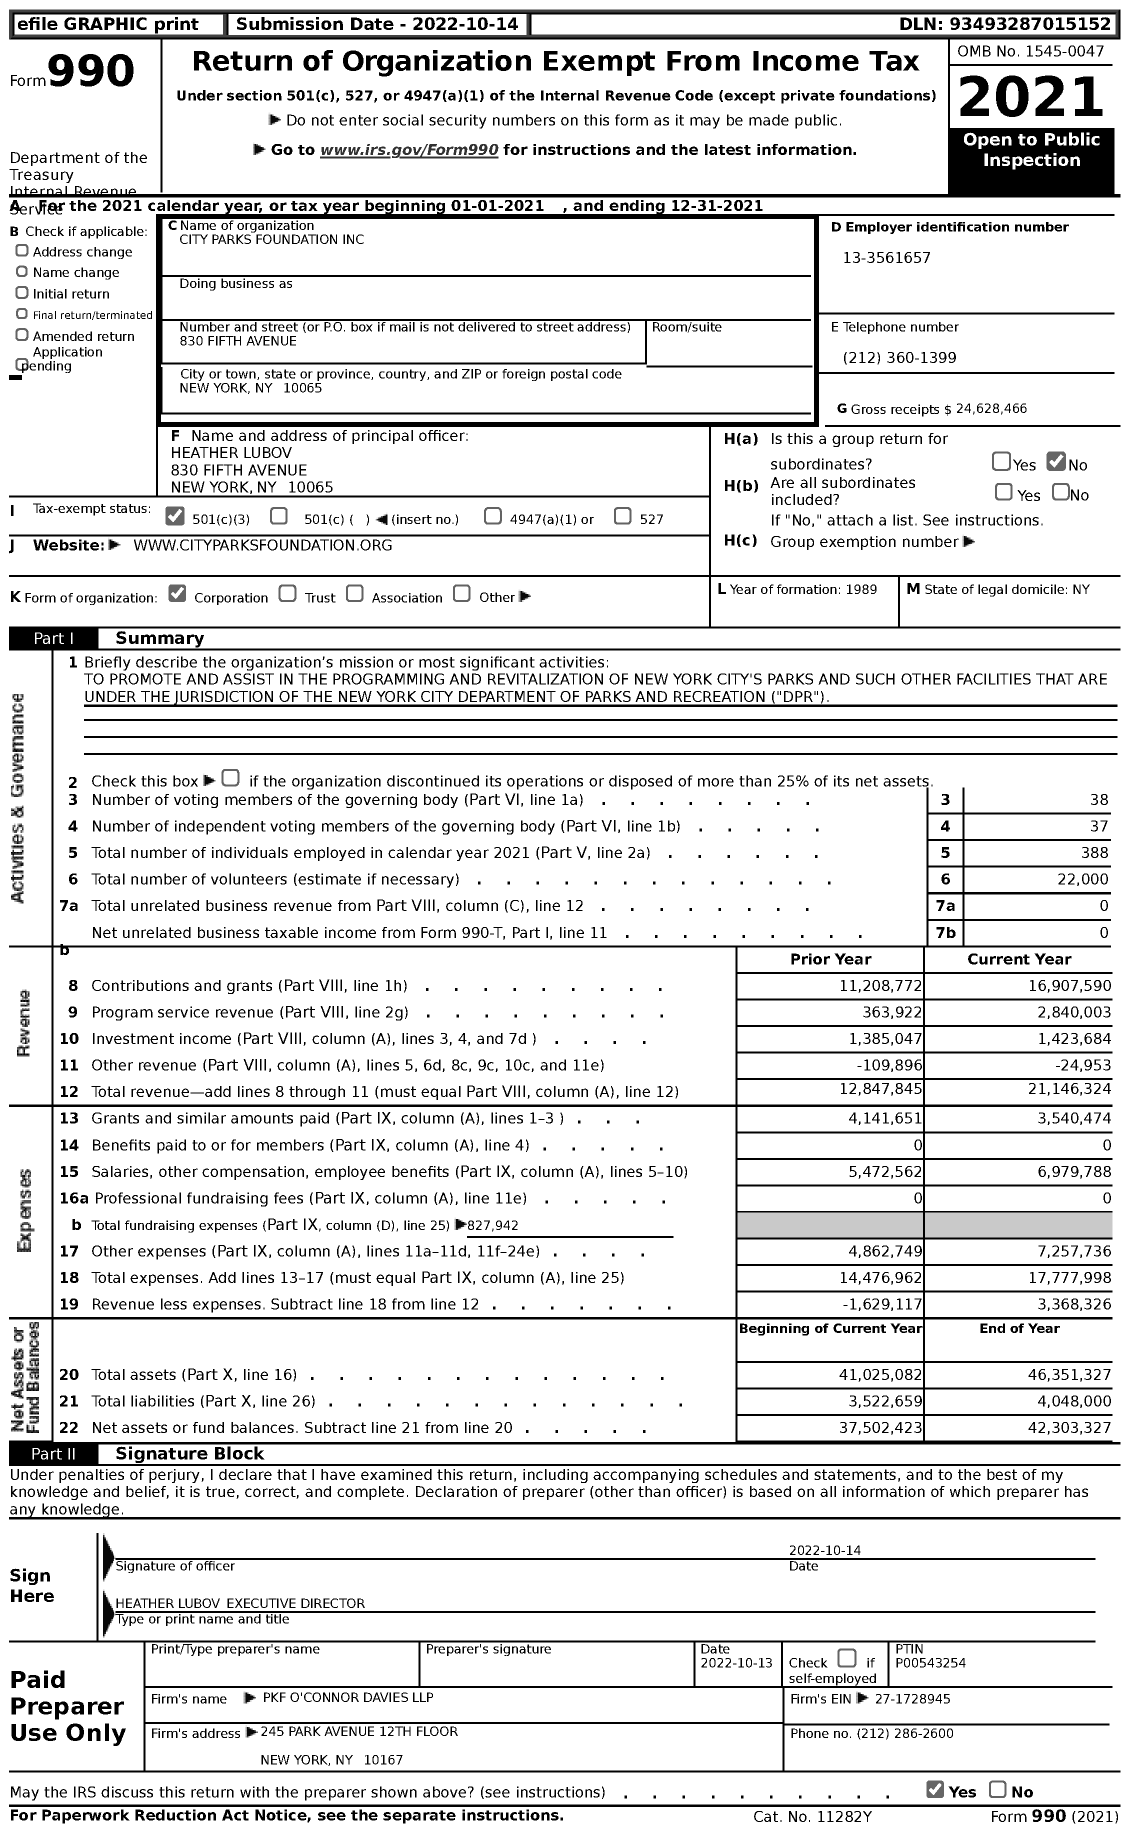 Image of first page of 2021 Form 990 for City Parks Foundation (CPF)